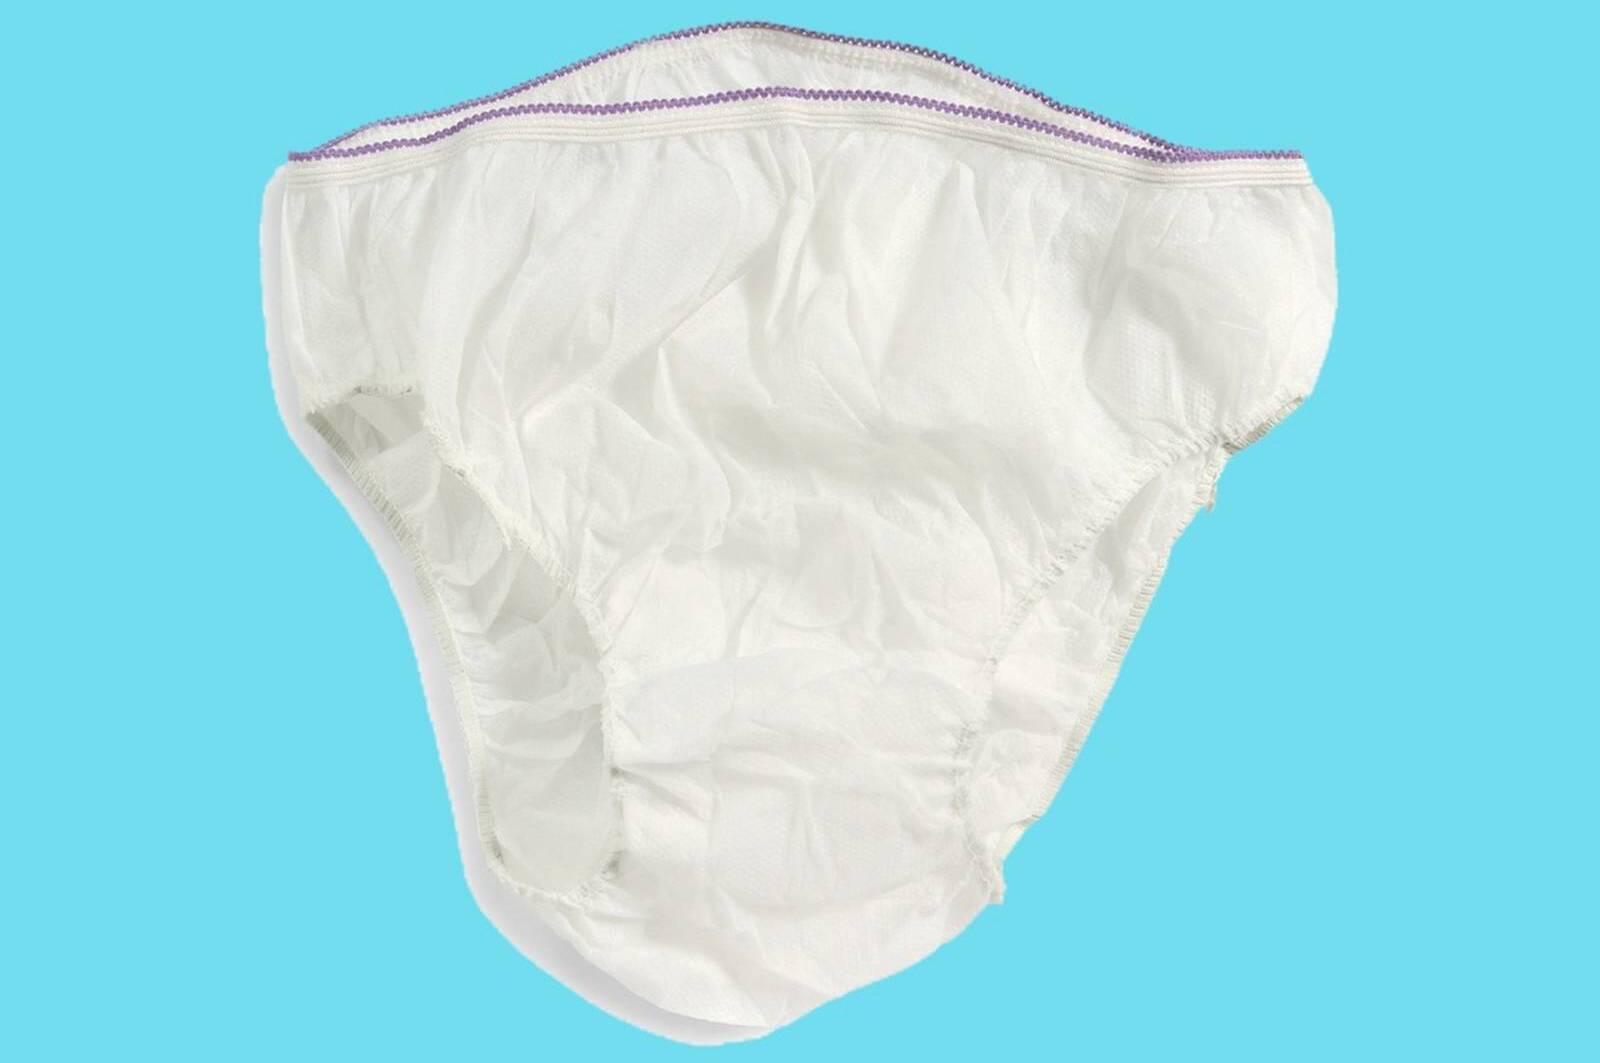 15 Best Disposable Panties For Women for 2023